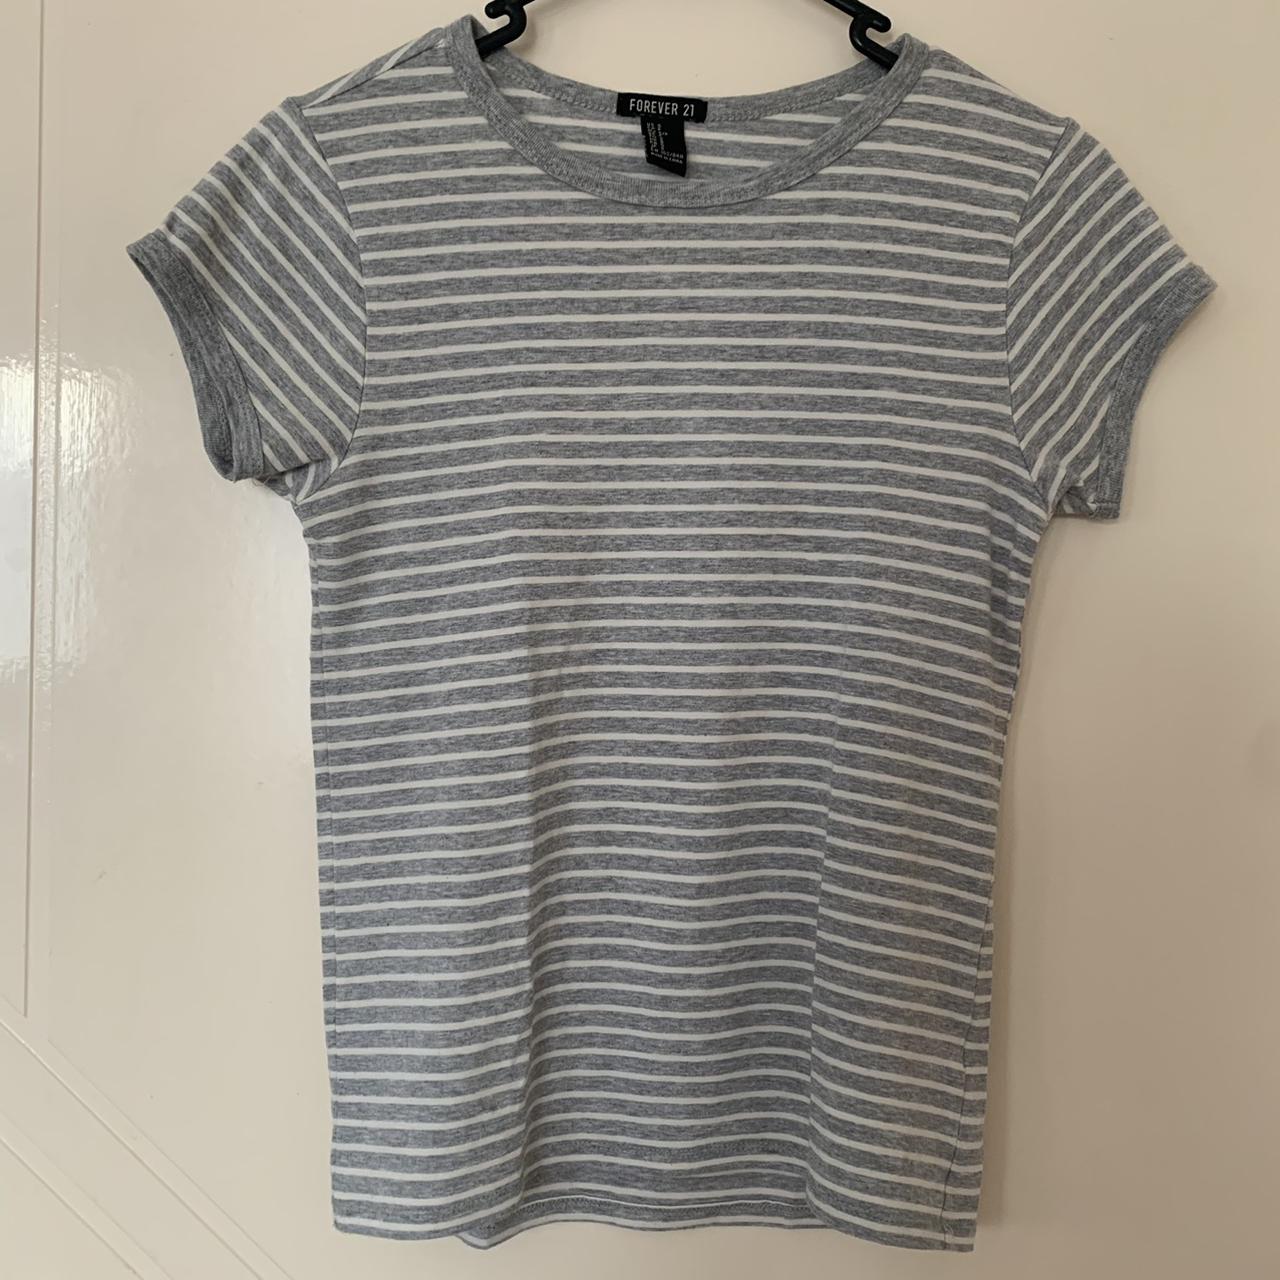 forever 21 grey and white striped shirt in great... - Depop